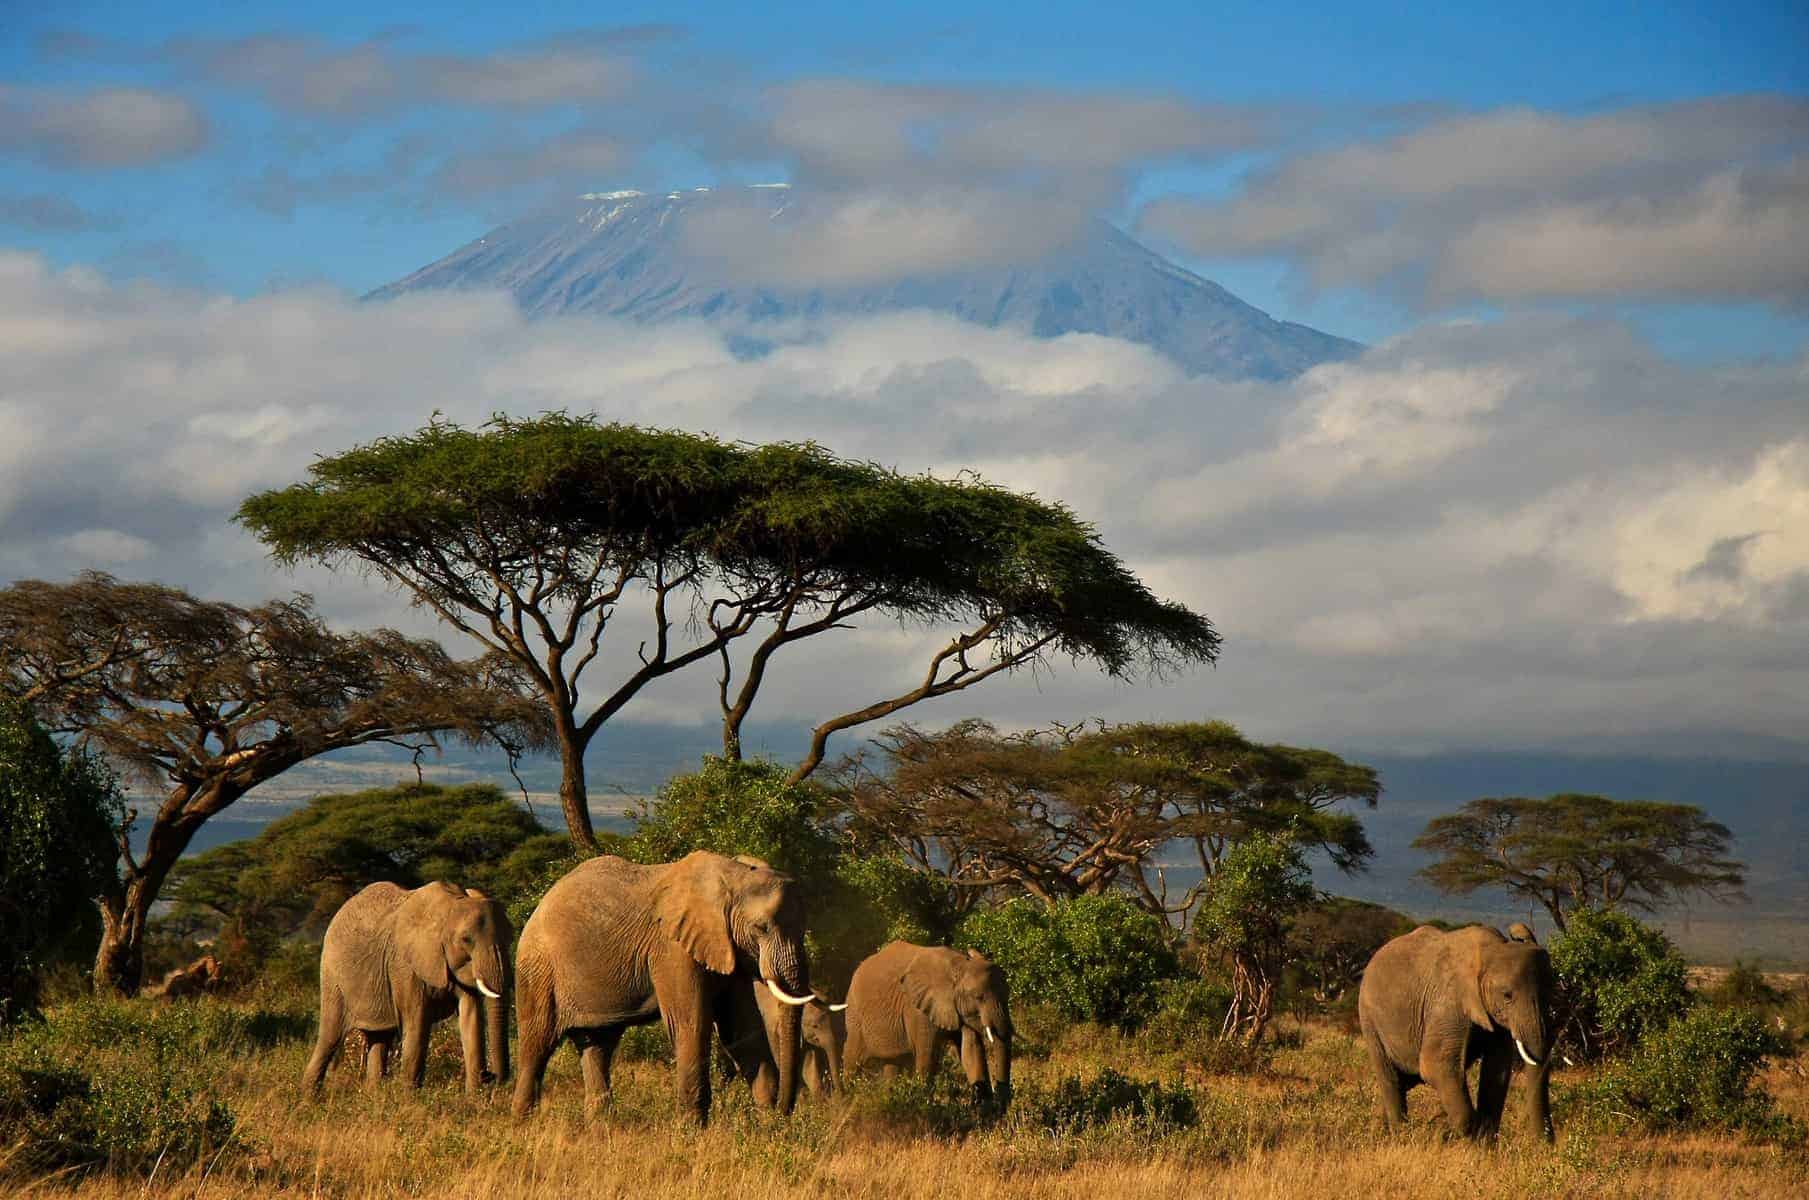 An elephant family walking in front of Mt. Kilimanjaro